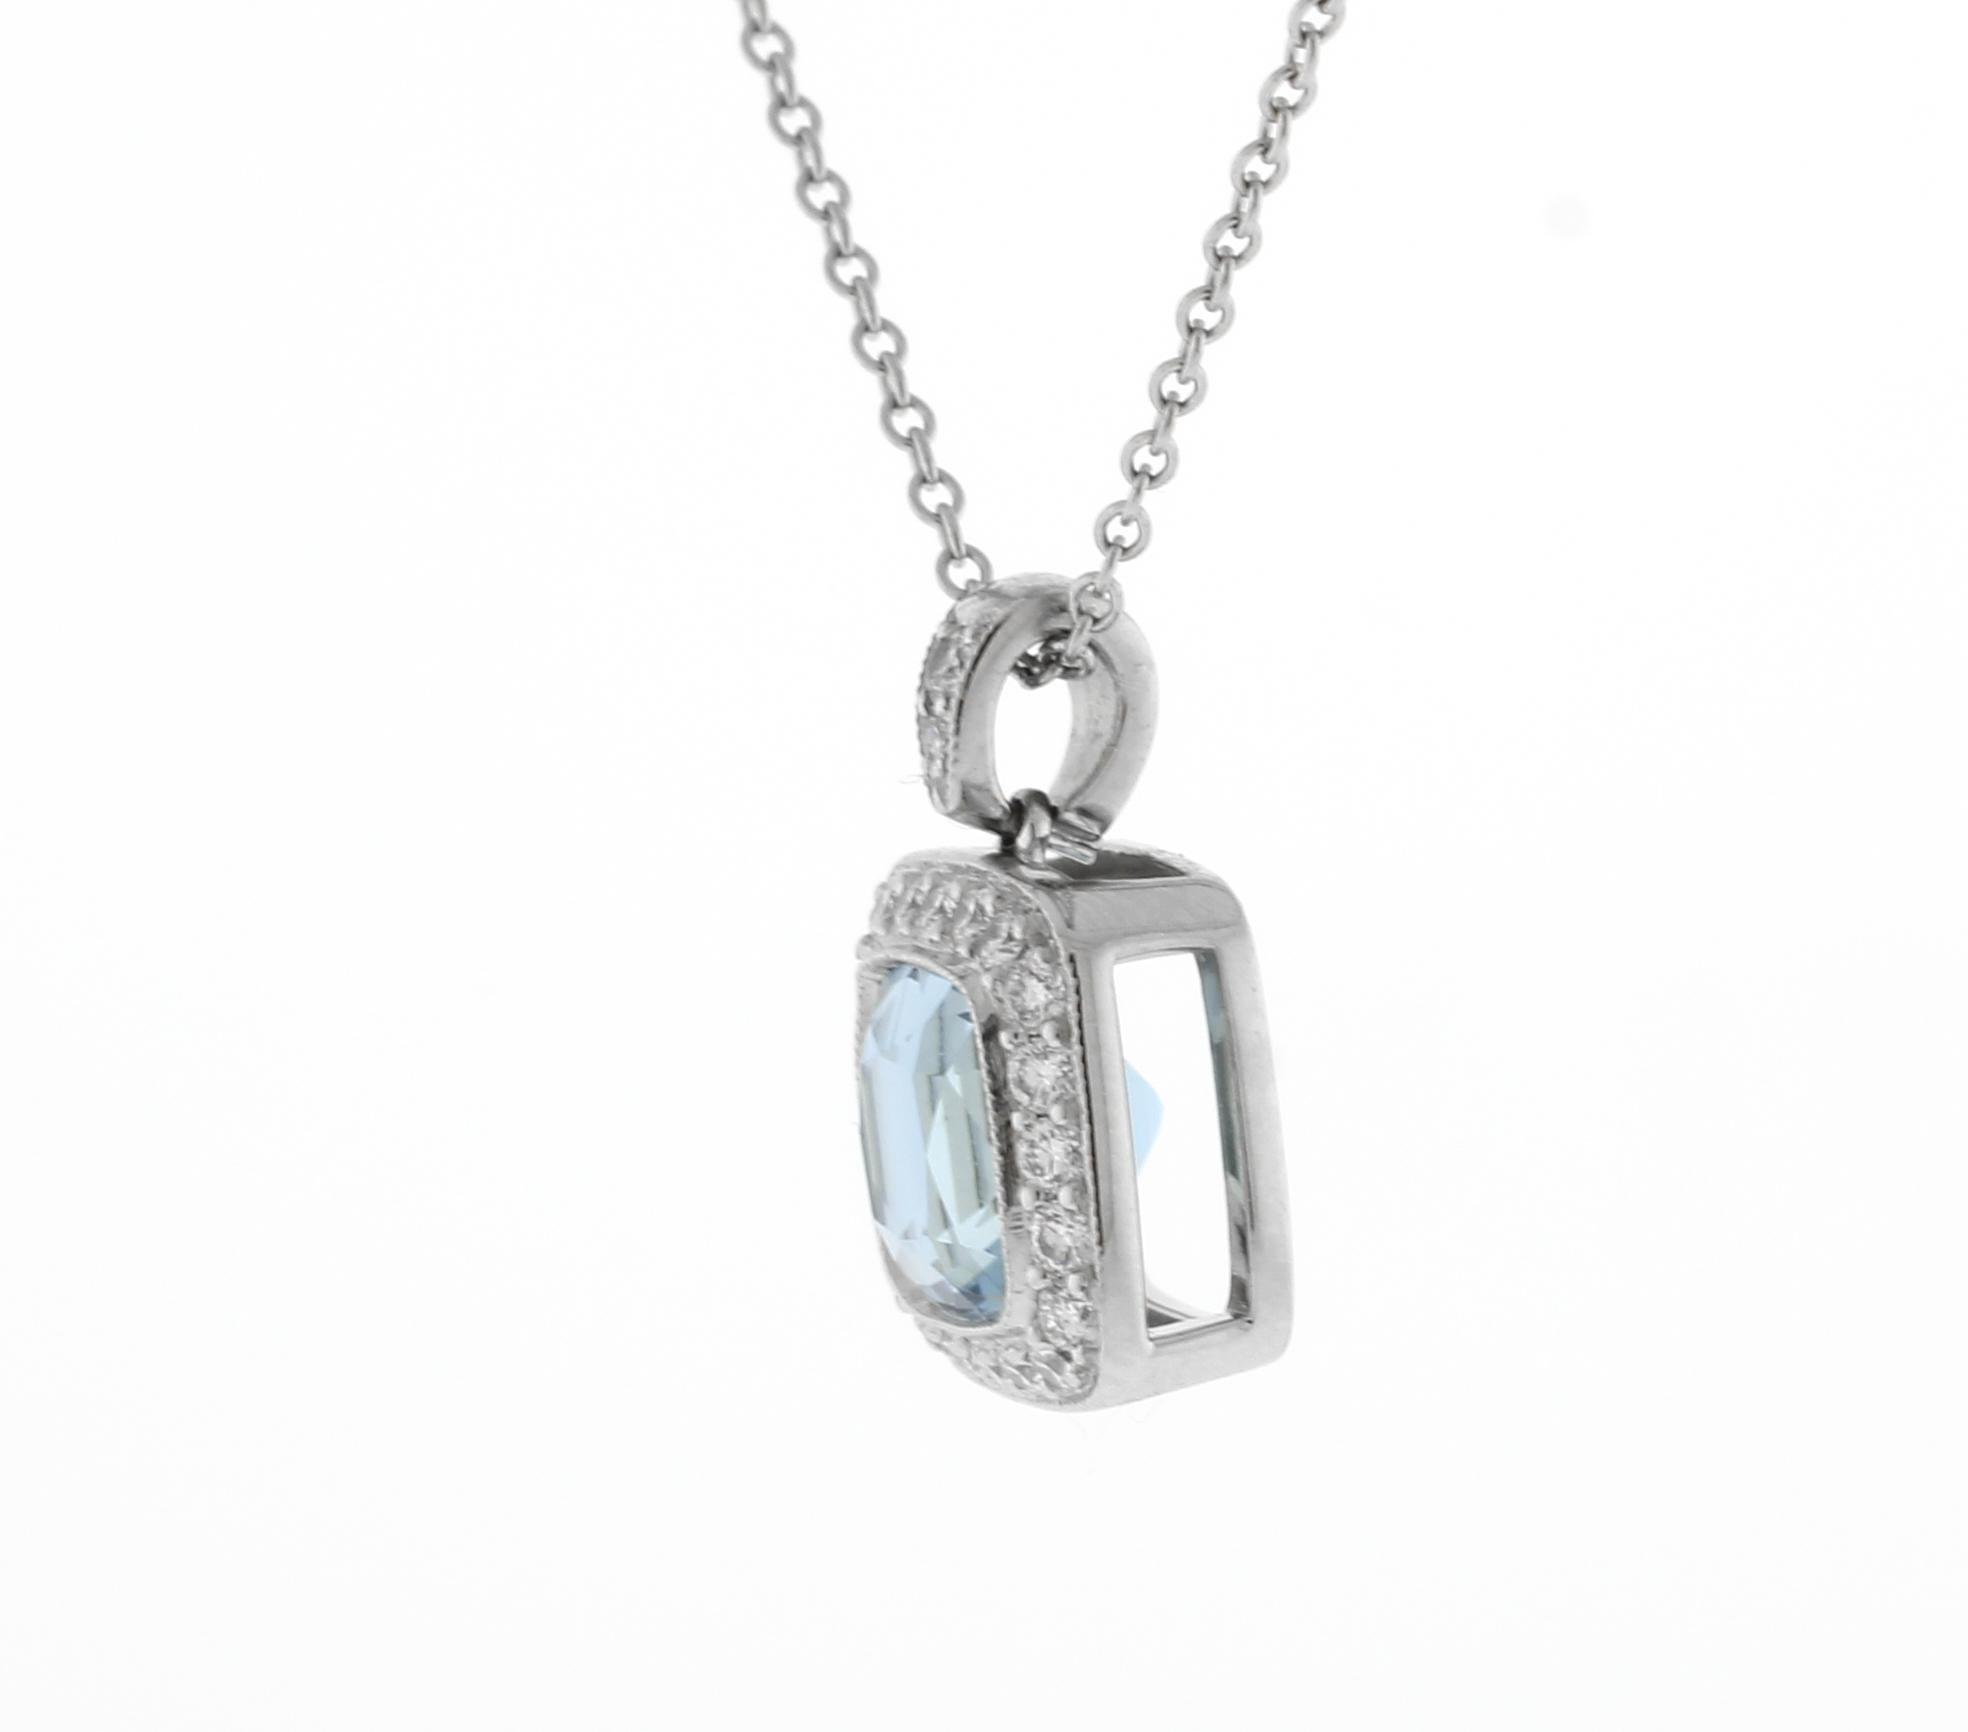 From Tiffany & Co.'s Legacy collection thier Aquamarine and diamond pendant necklace.
♦ Designer: Tiffany & Co.
♦ Metal: Platinum
♦ Circa2005
♦ Aquamarine weighs 2 carats
♦ Pendant 7/16 of an inch square, chain 16 inches 
♦ 22Damond=.30 carats
♦